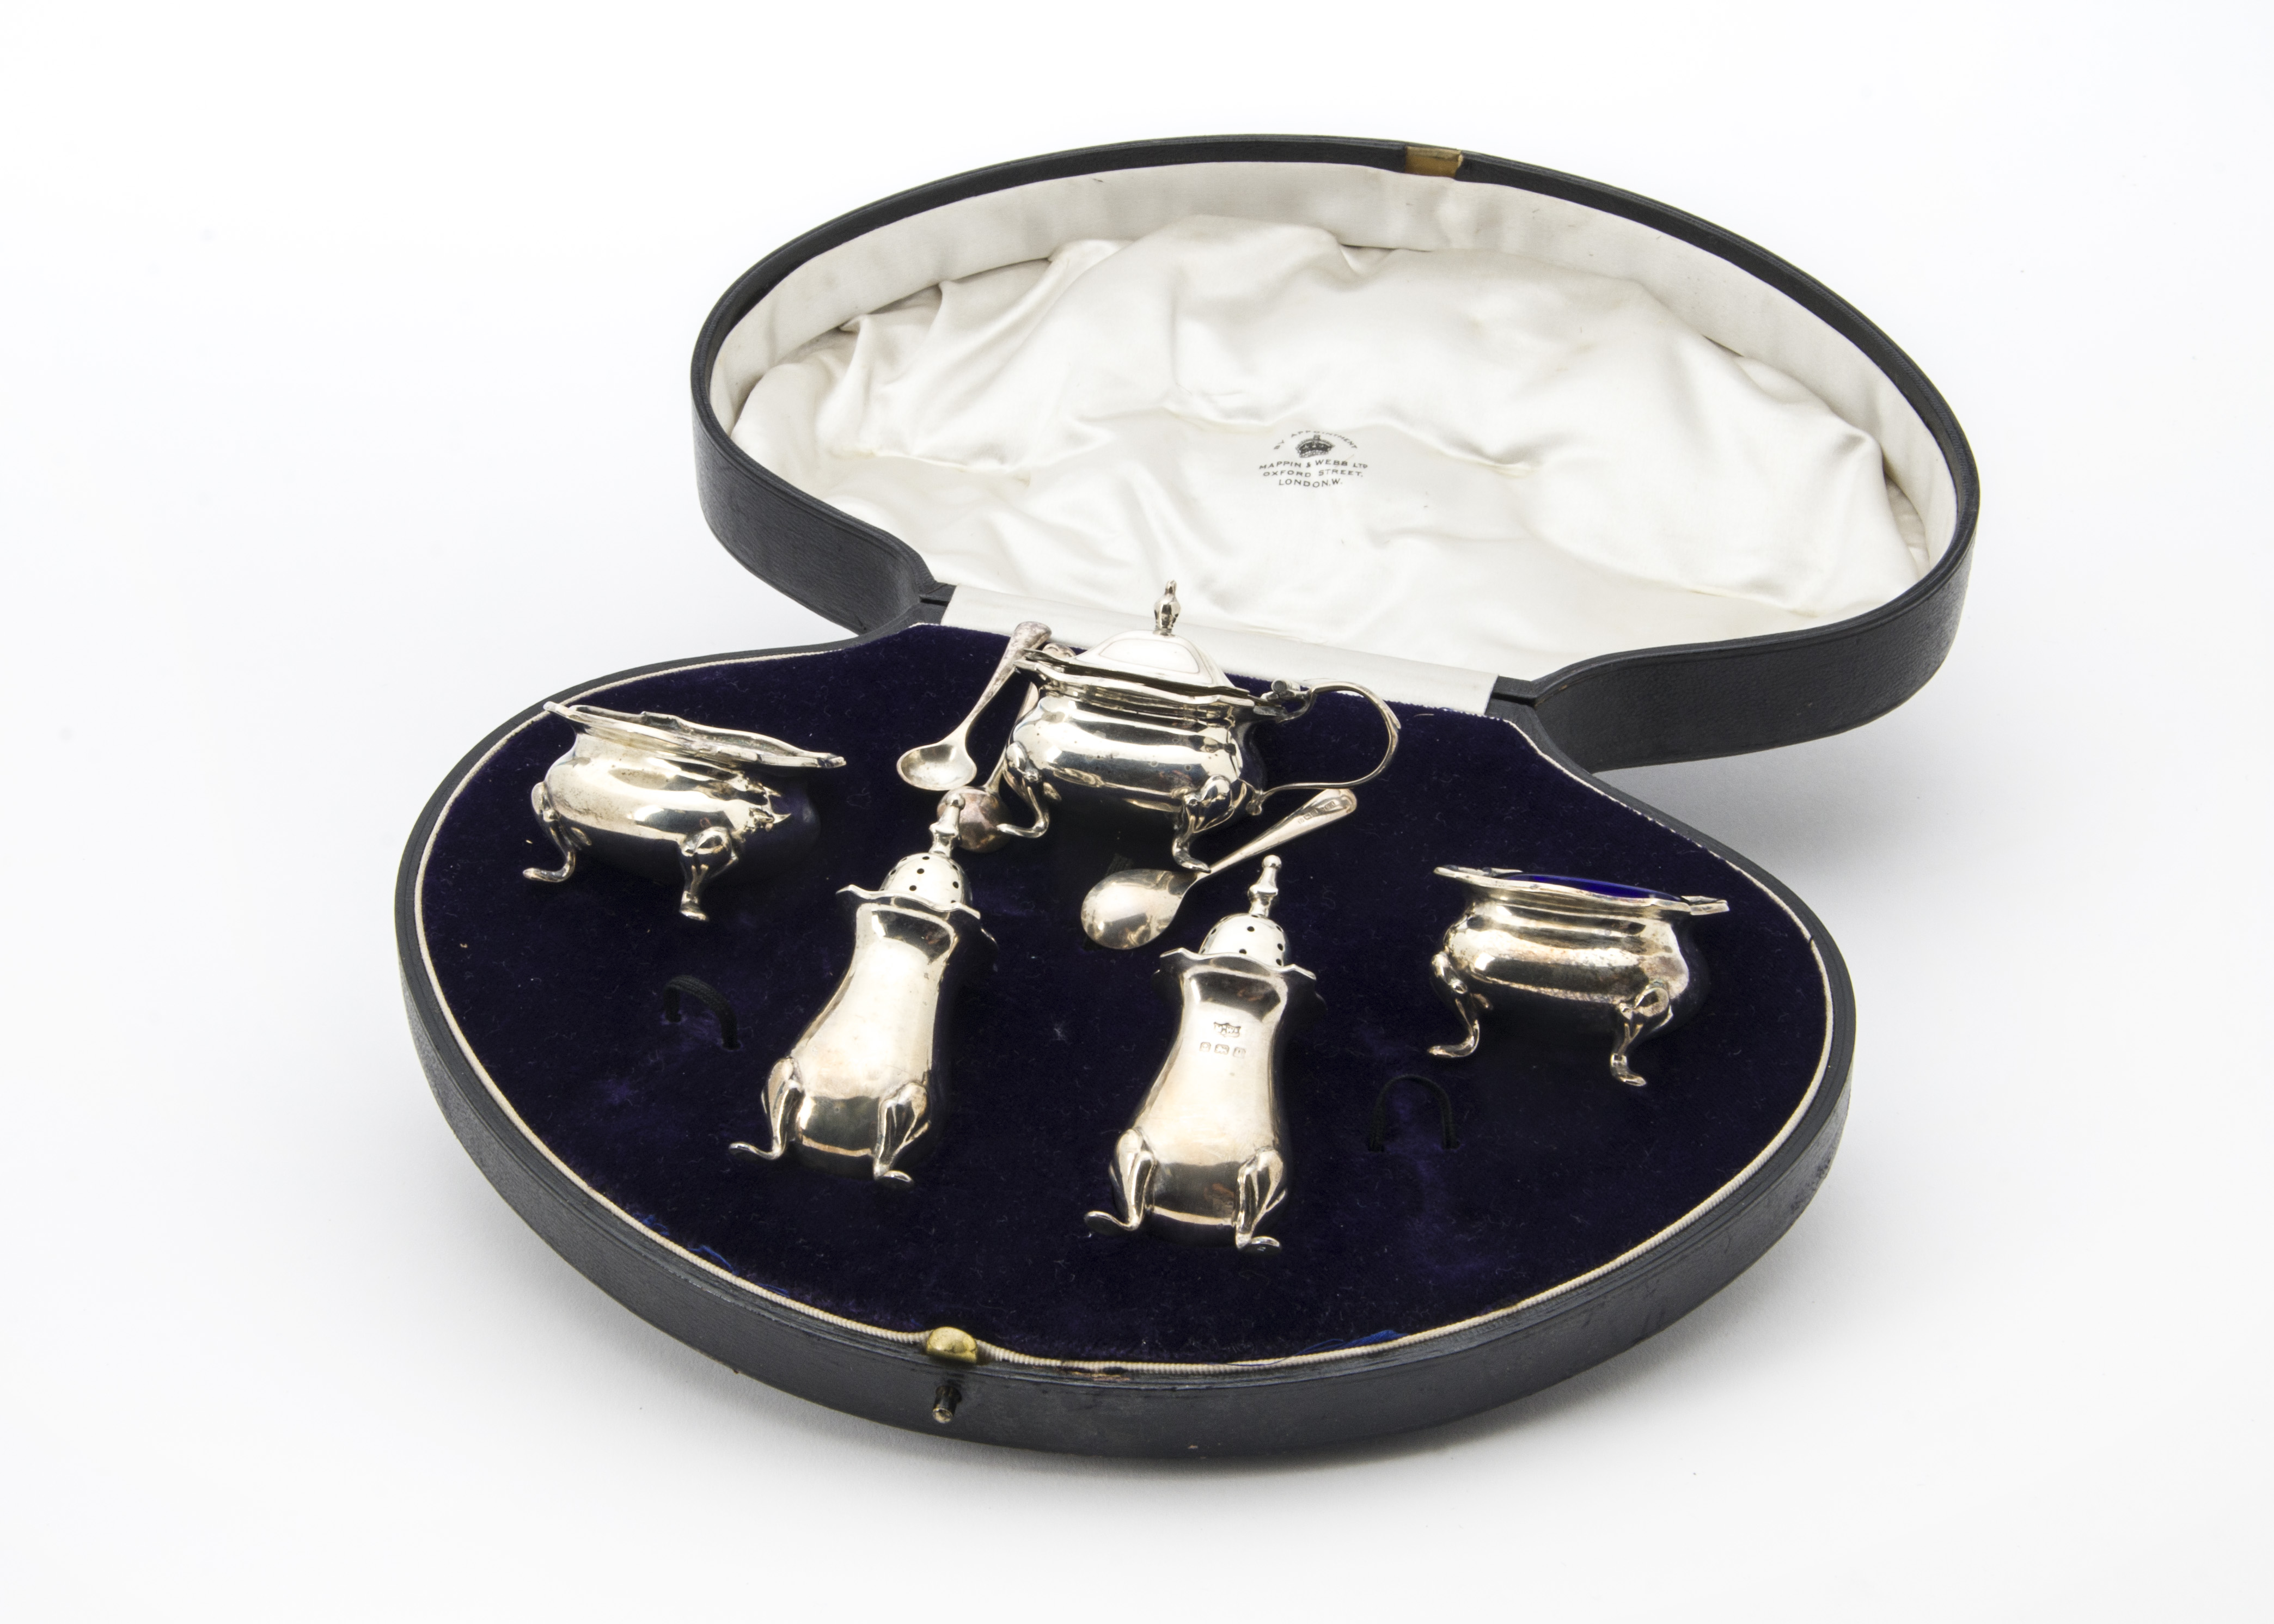 An Art Deco period five piece cruet set from Mappin & Webb, presented in an M&W fitted box with